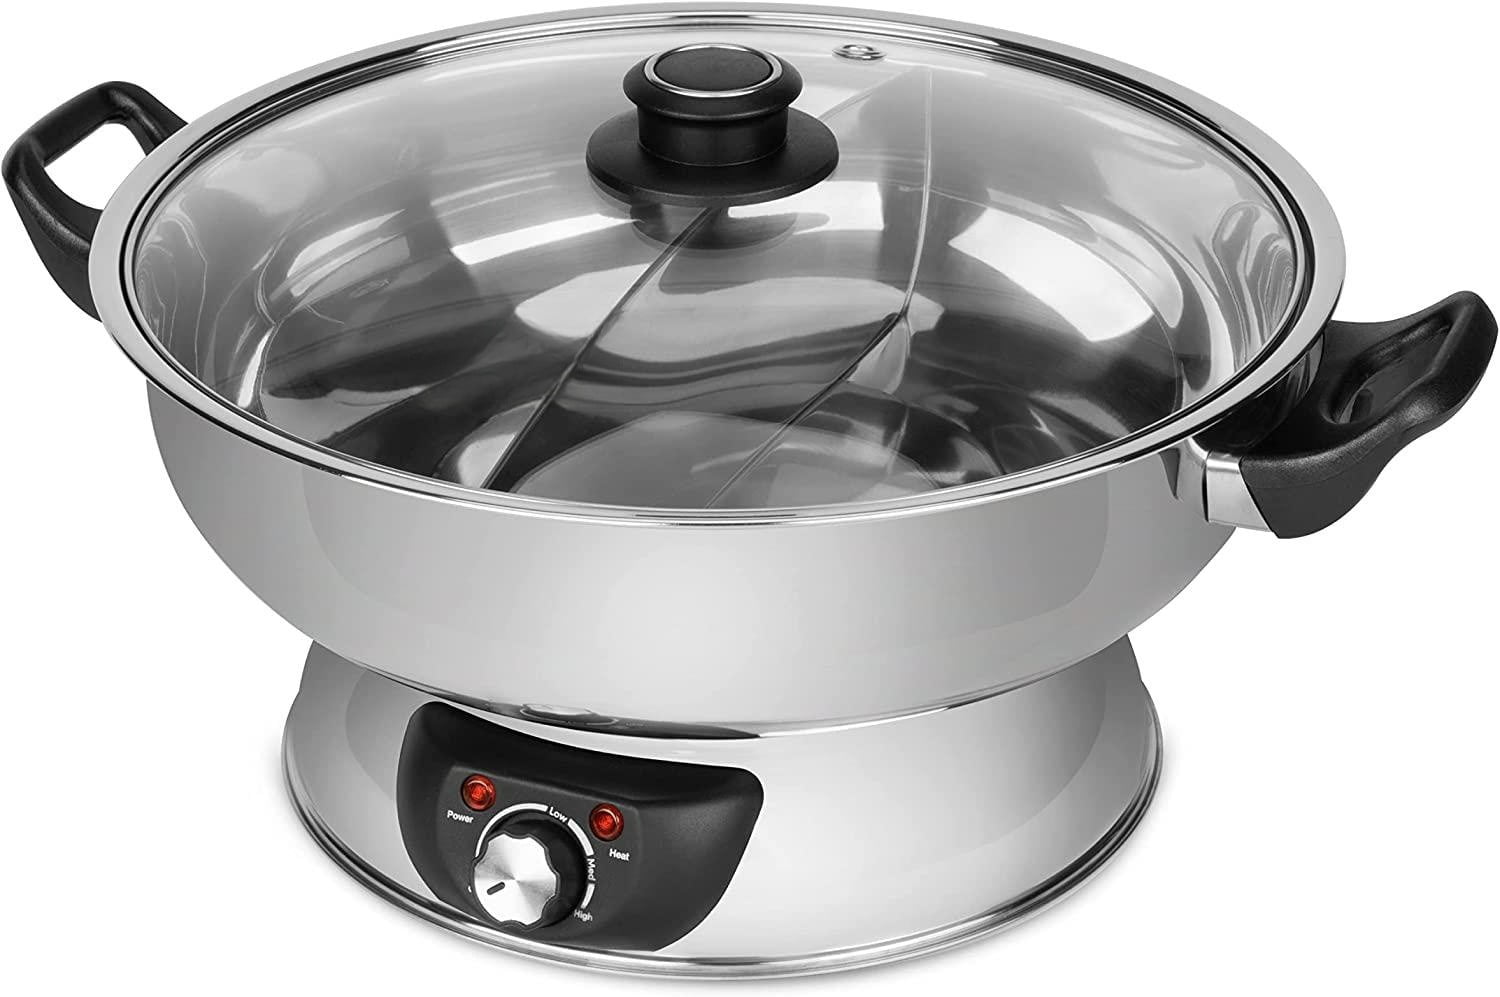 Aroma Housewares ASP-610 Dual-Sided Shabu Hot Pot, 5Qt, Stainless Steel  Aroma Housewares 3 Uncooked/6 Cups Cooked Rice Cooker, Steamer,  Multicooker